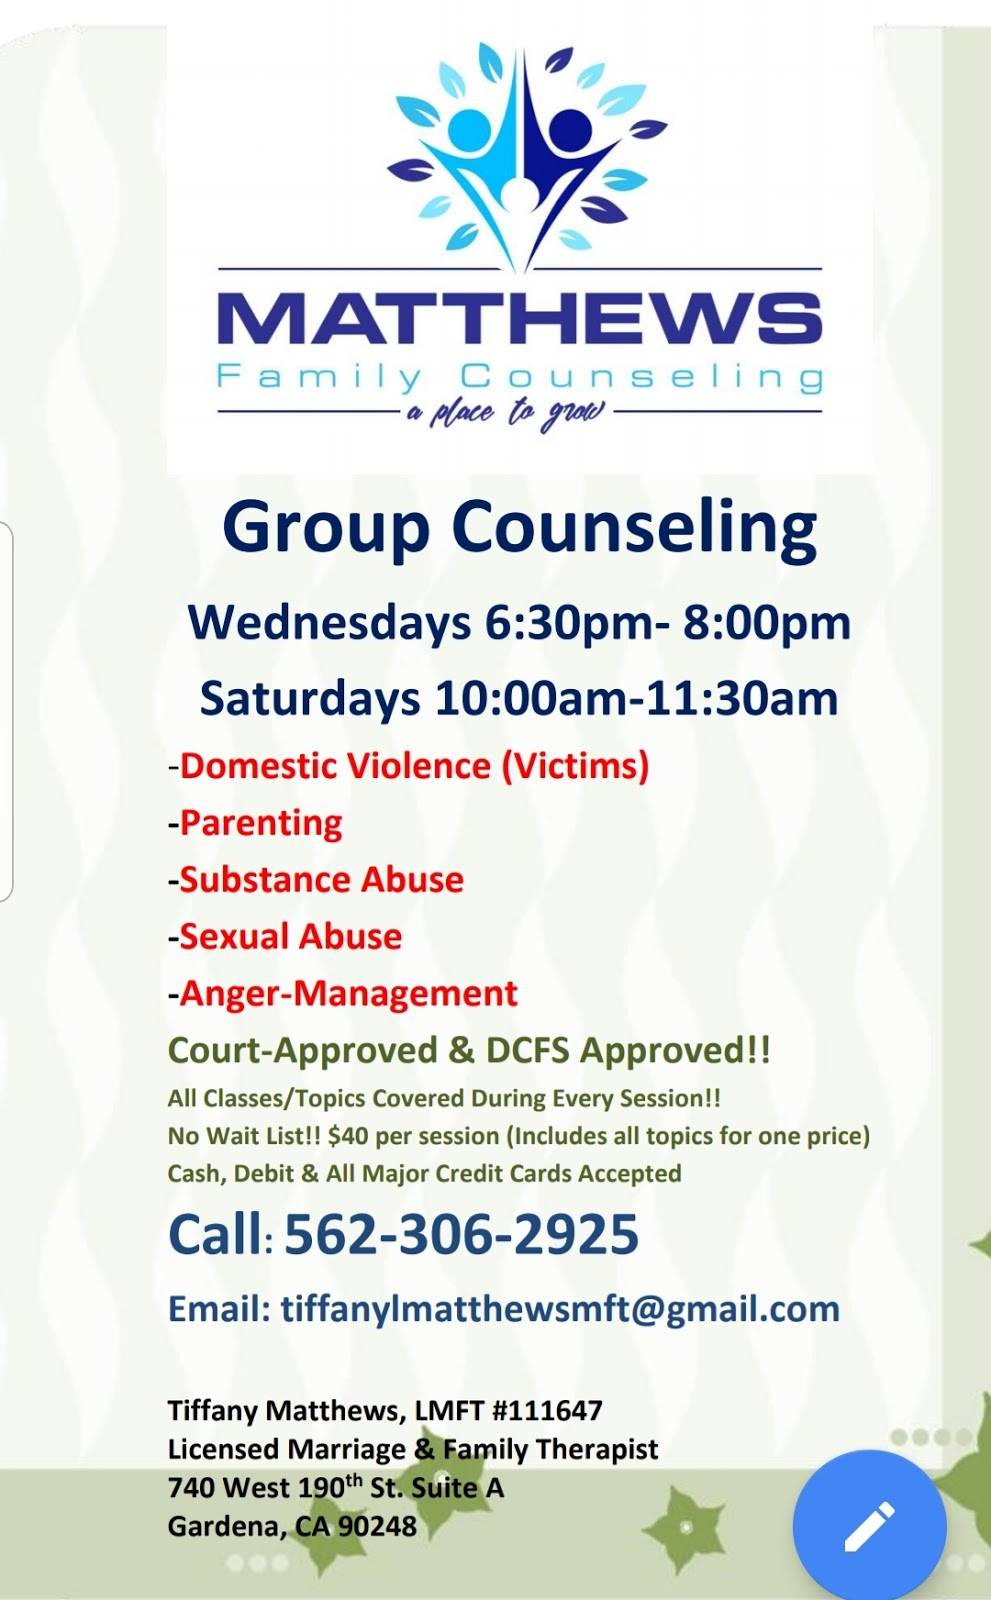 Matthews Family Counseling-A Place to Grow | 740 W 190th St suite a, Gardena, CA 90248 | Phone: (562) 306-2925